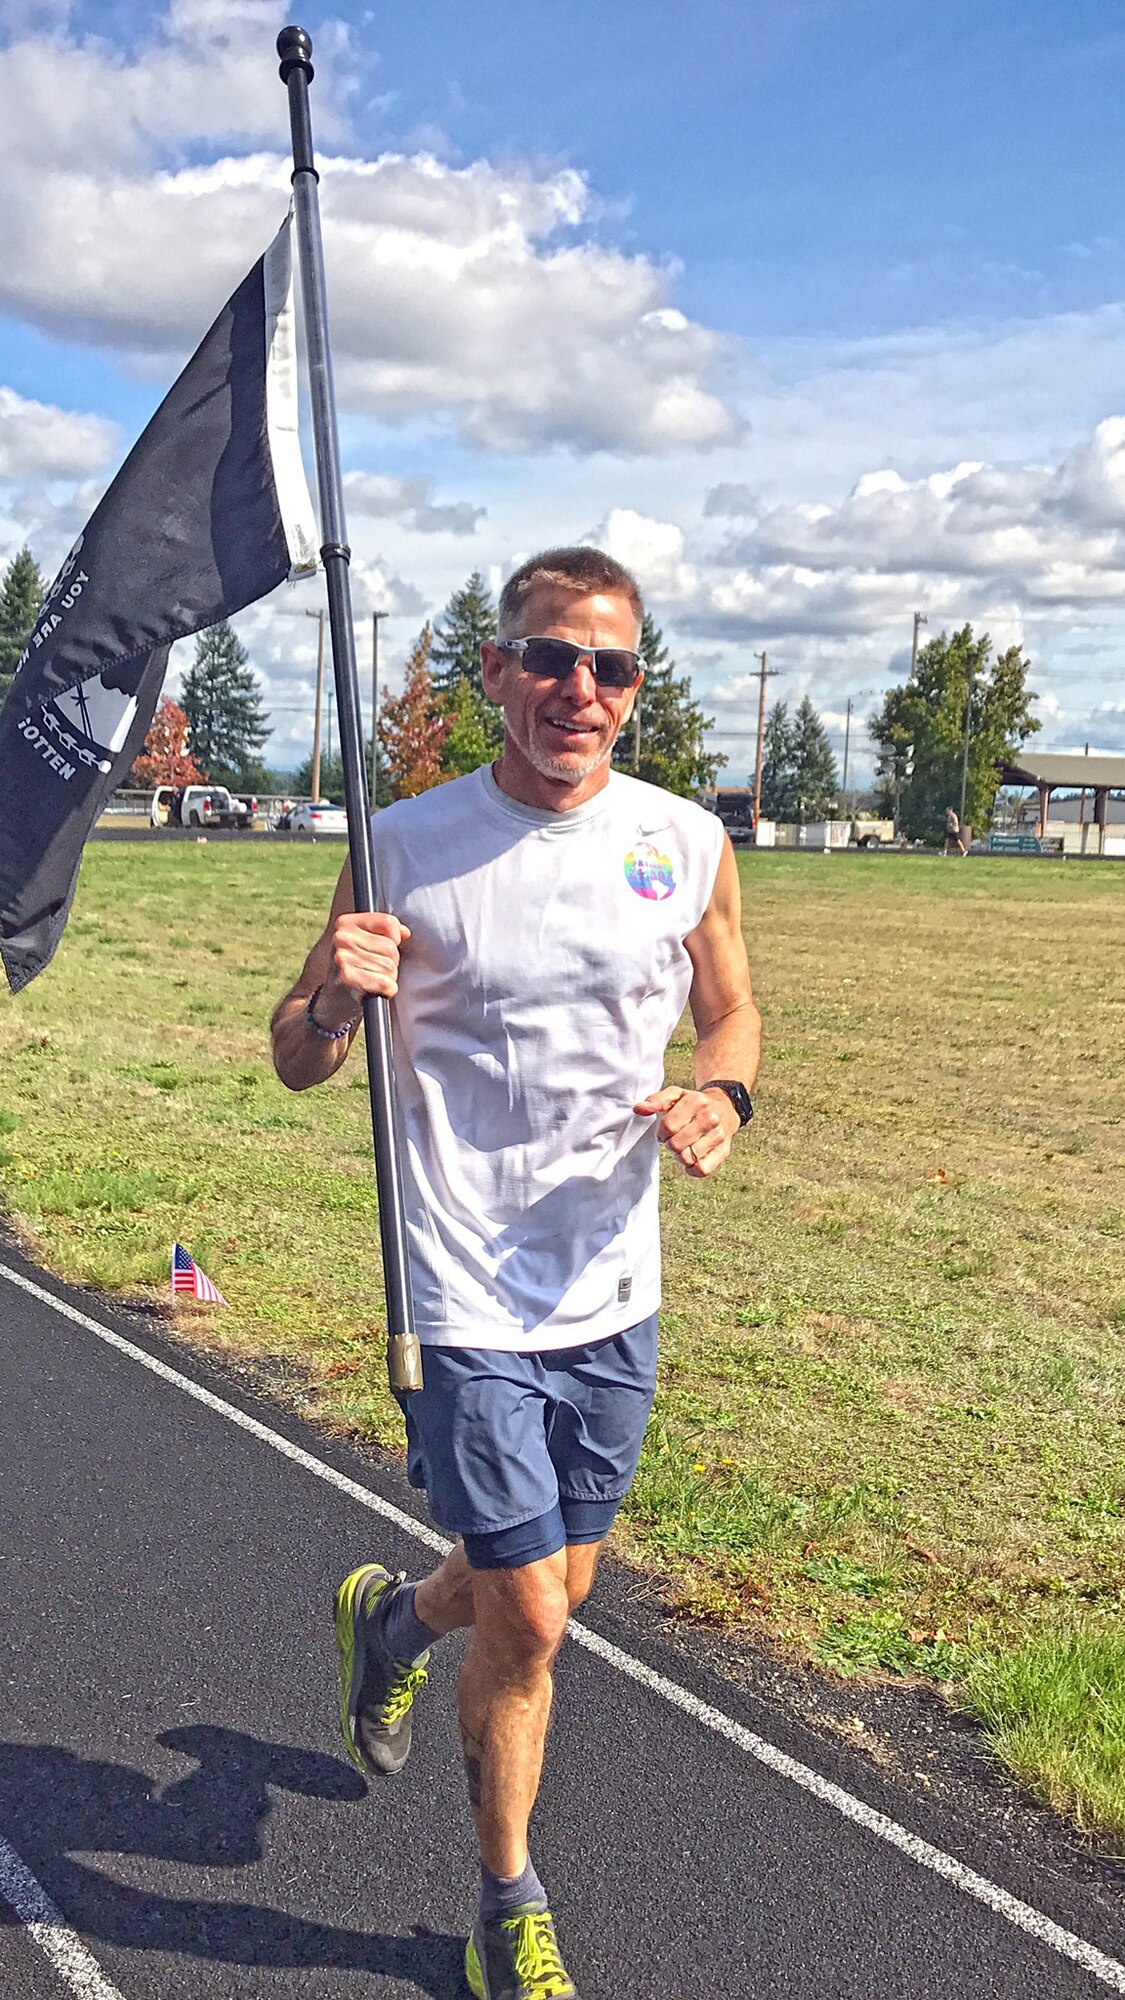 Bruce Robie, 225th Support Squadron, runs 81 miles during the Joint Base Lewis-McChord 24-Hour POW/MIA Remembrance Run Sept. 19-20, 2019. Robie placed first in individual standings. (Courtesy photo)